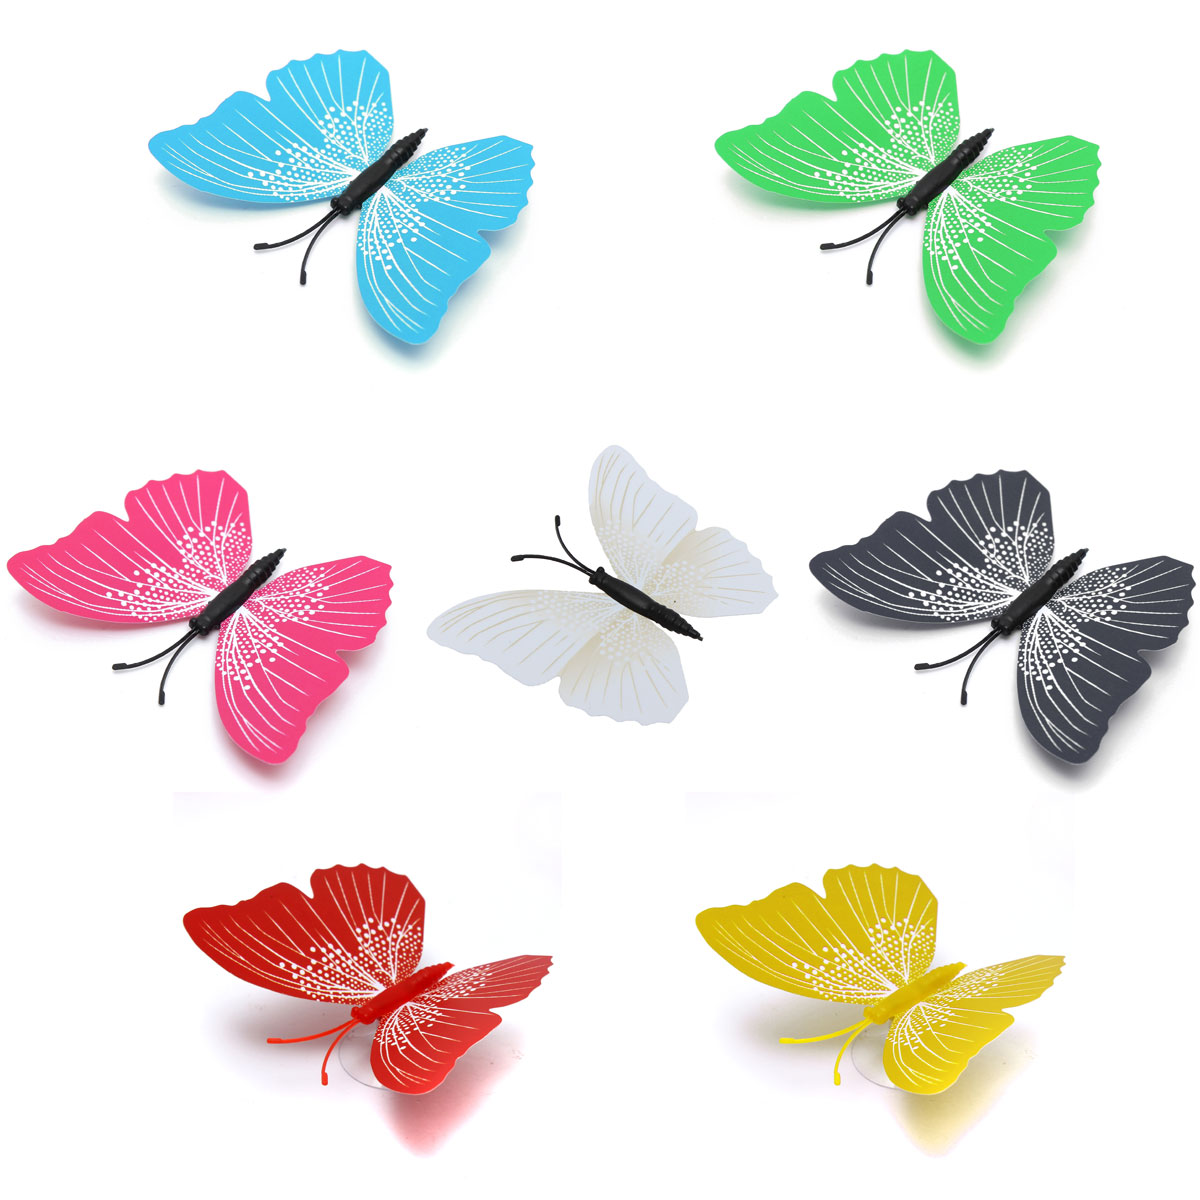 12PCS-3D-Butterfly-Art-Design-Decals-Wall-Stickers-Home-Decor-Room-Wedding-Party-Decorations-1006755